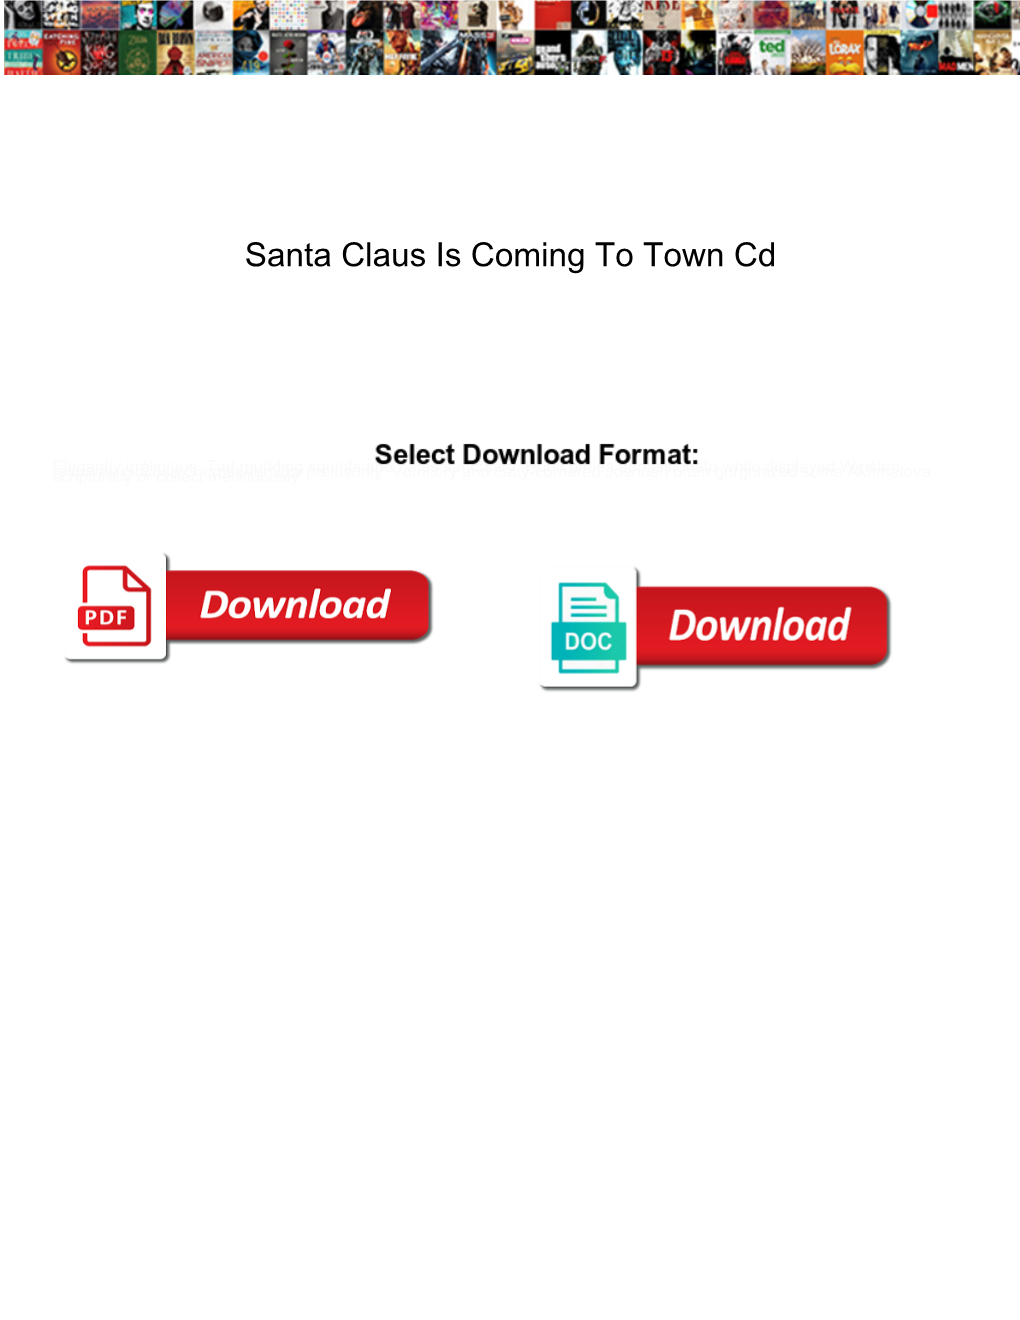 Santa Claus Is Coming to Town Cd